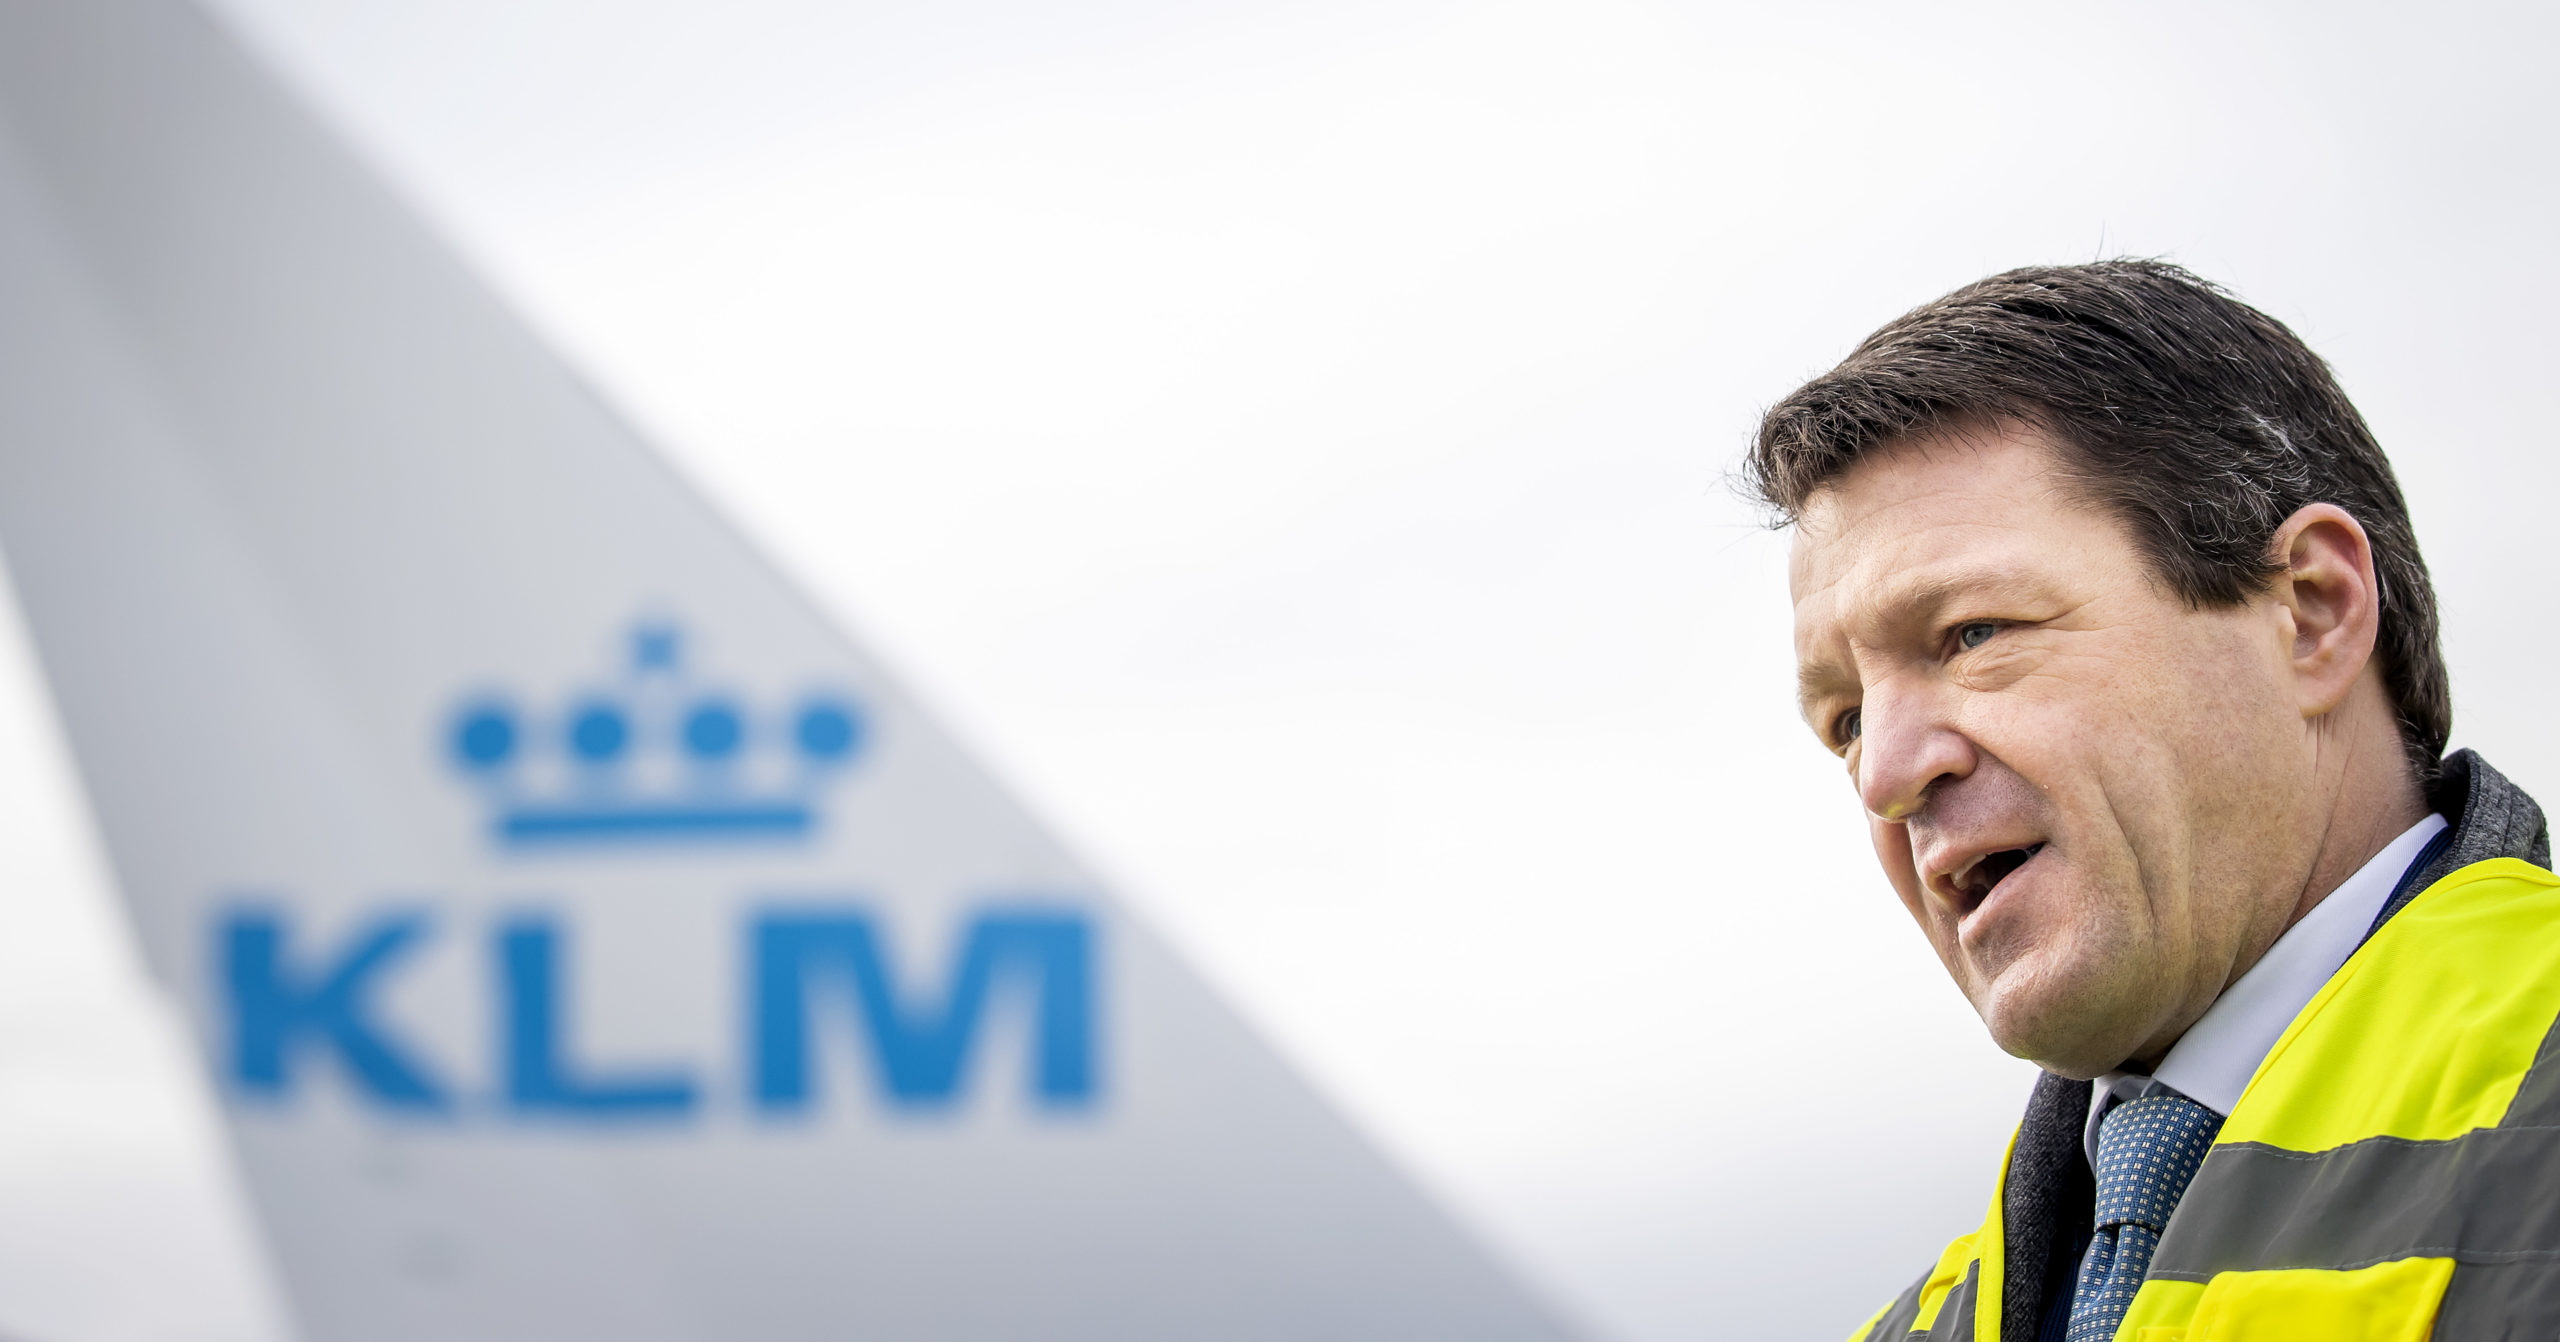 Pieter Elbers to step down as the CEO of KLM